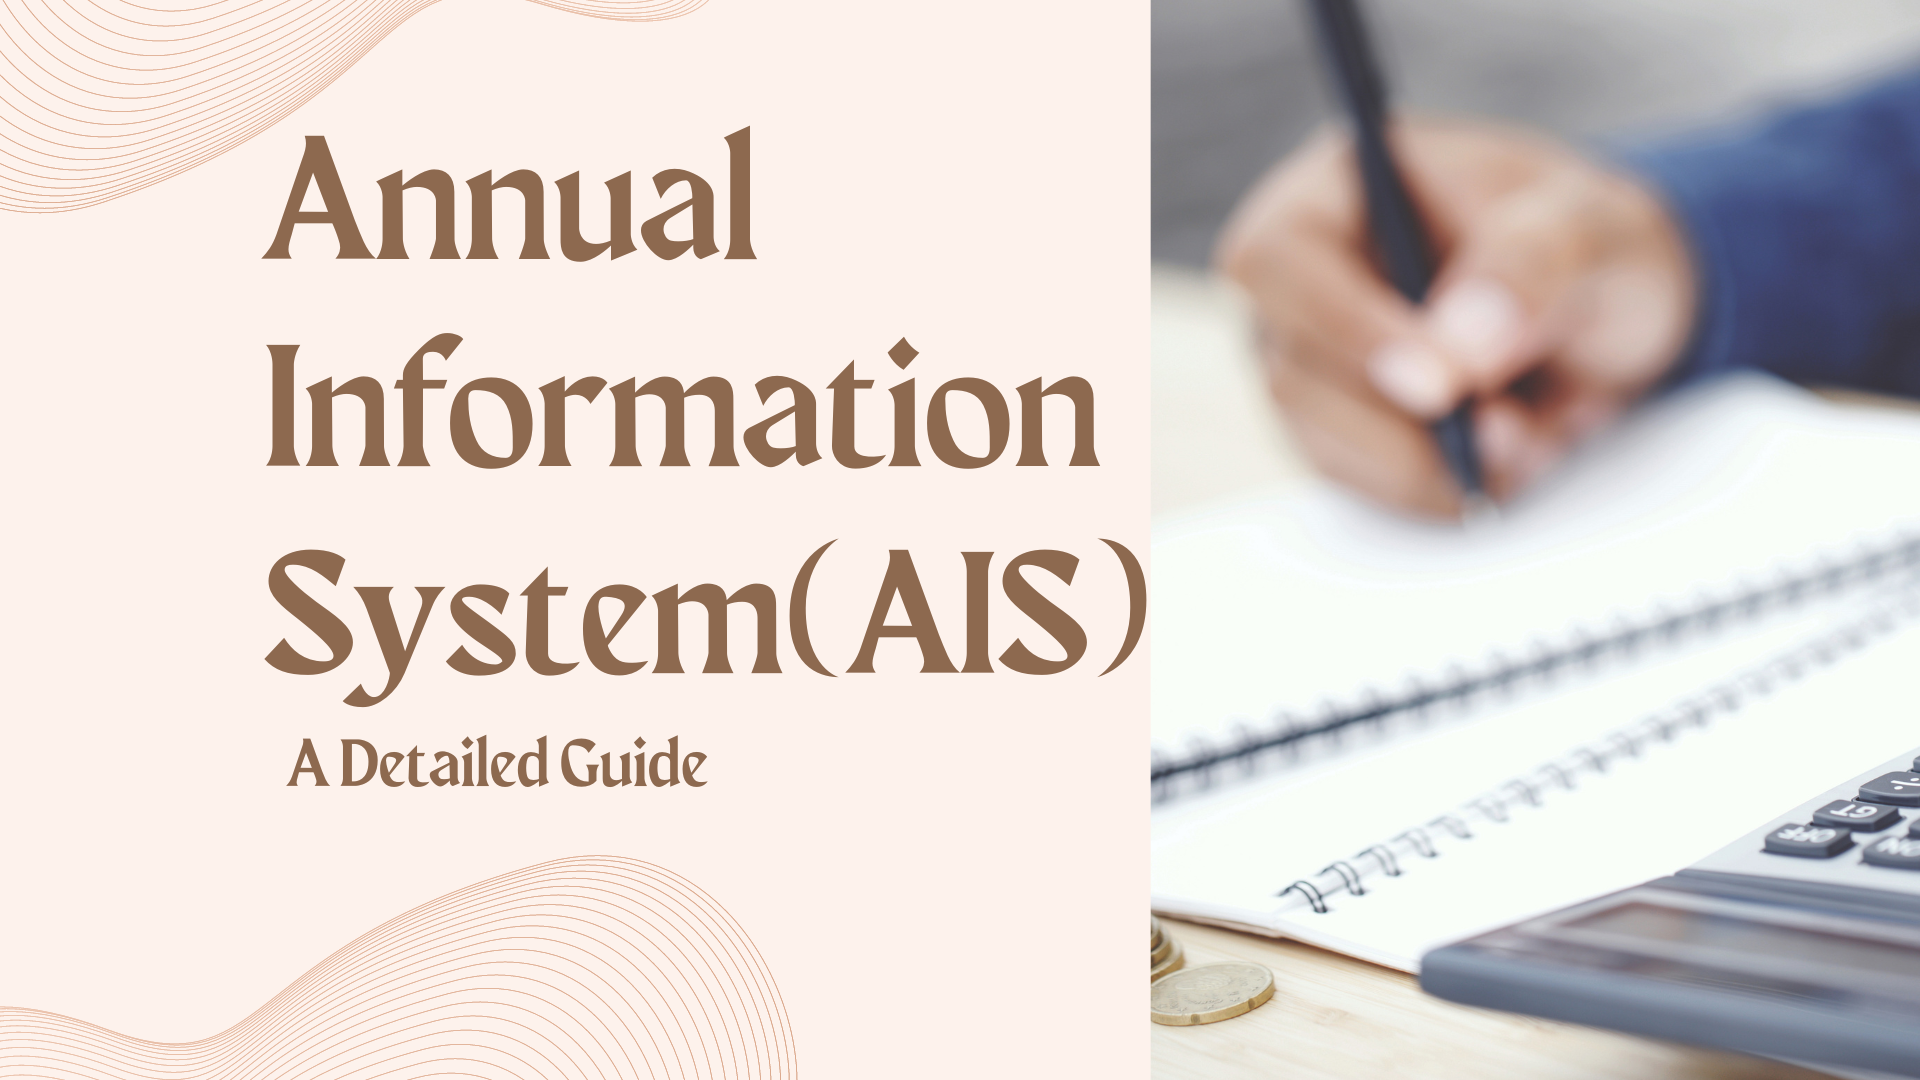 Annual Information System